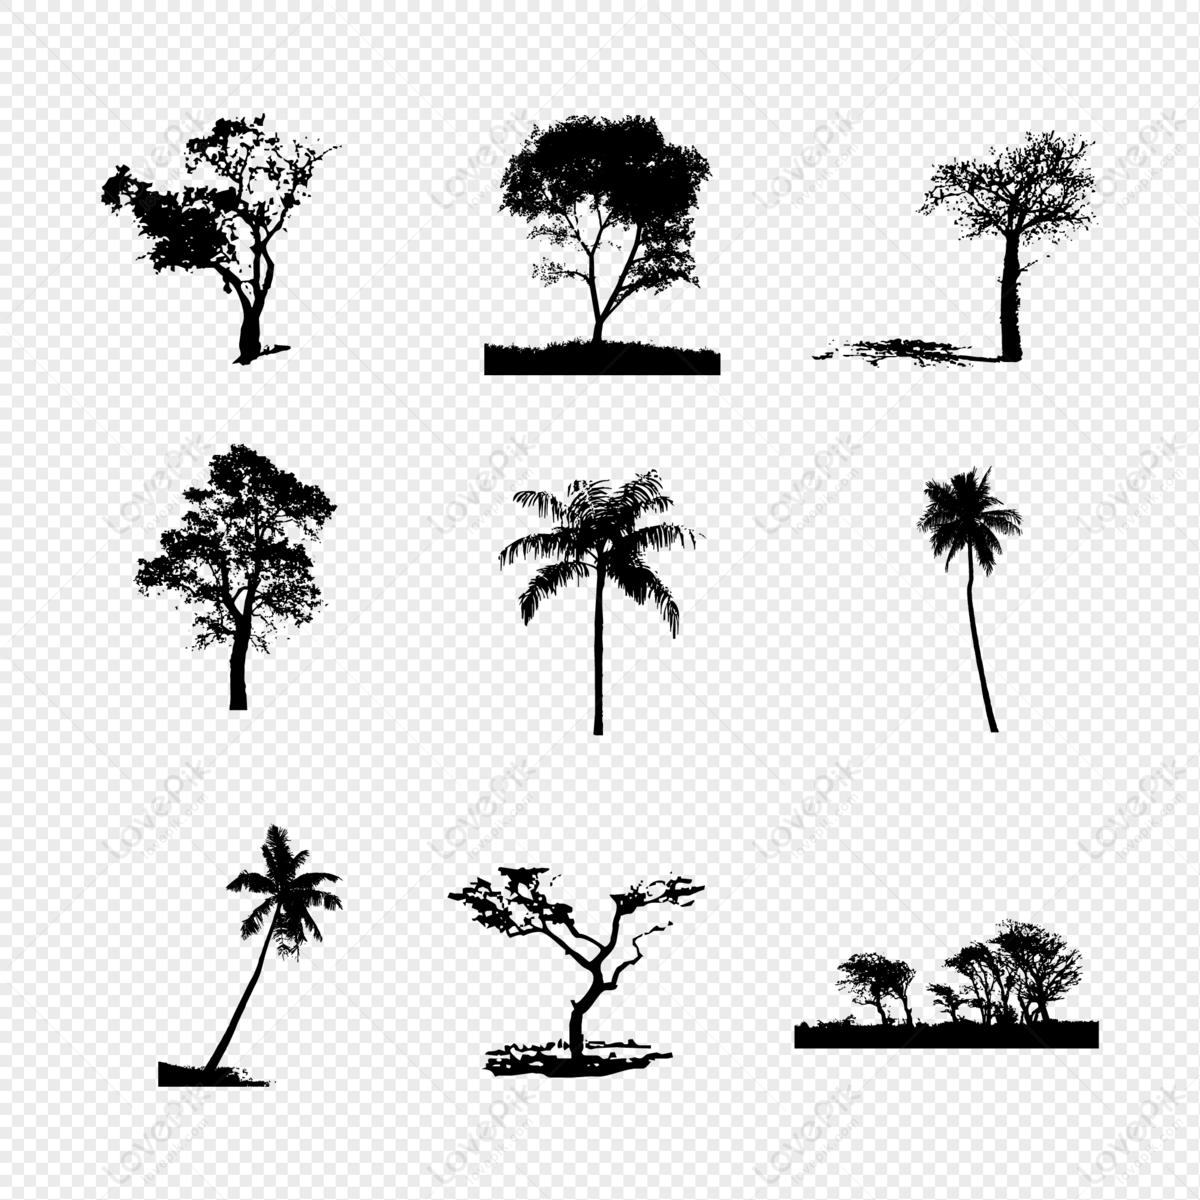 tree silhouette vector, black vector, black silhouettes, trees vector free png